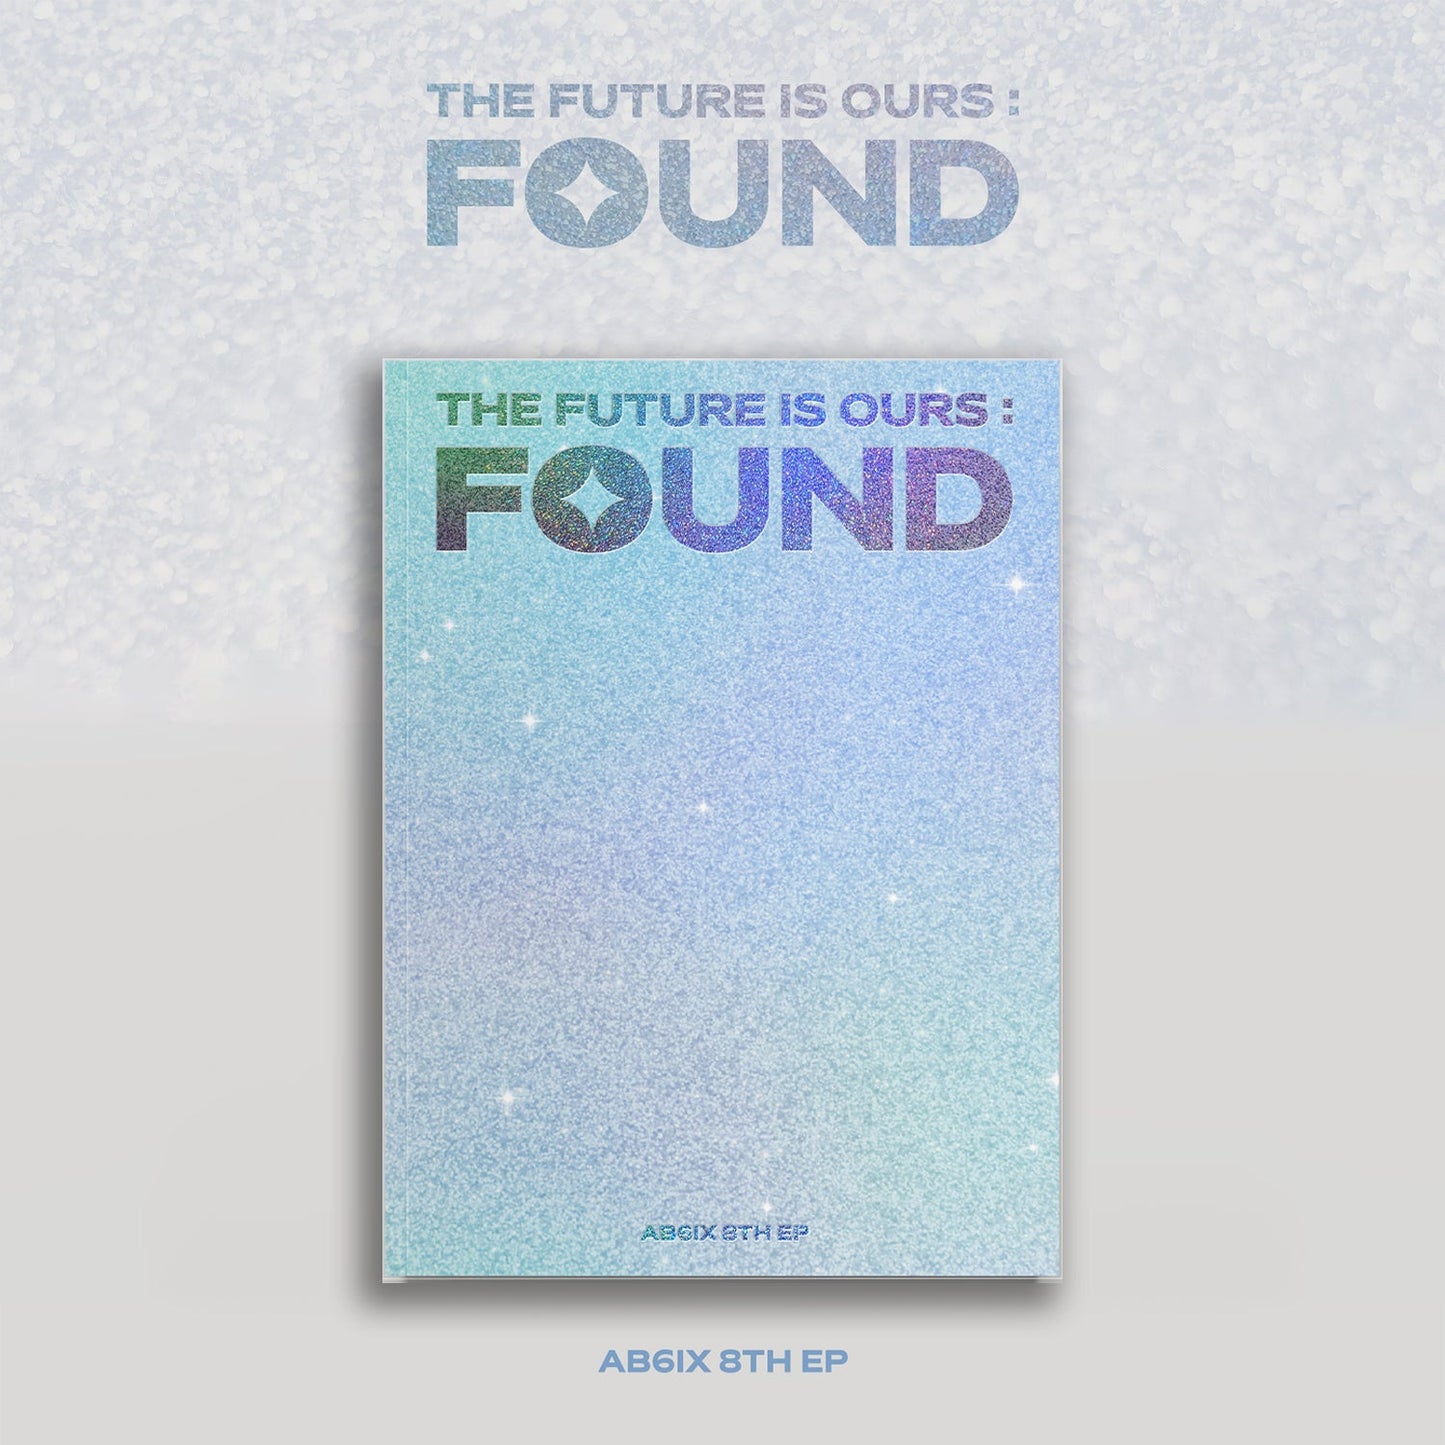 AB6IX 8TH EP ALBUM 'THE FUTURE IS OURS : FOUND' BRIGHT VERSION COVER